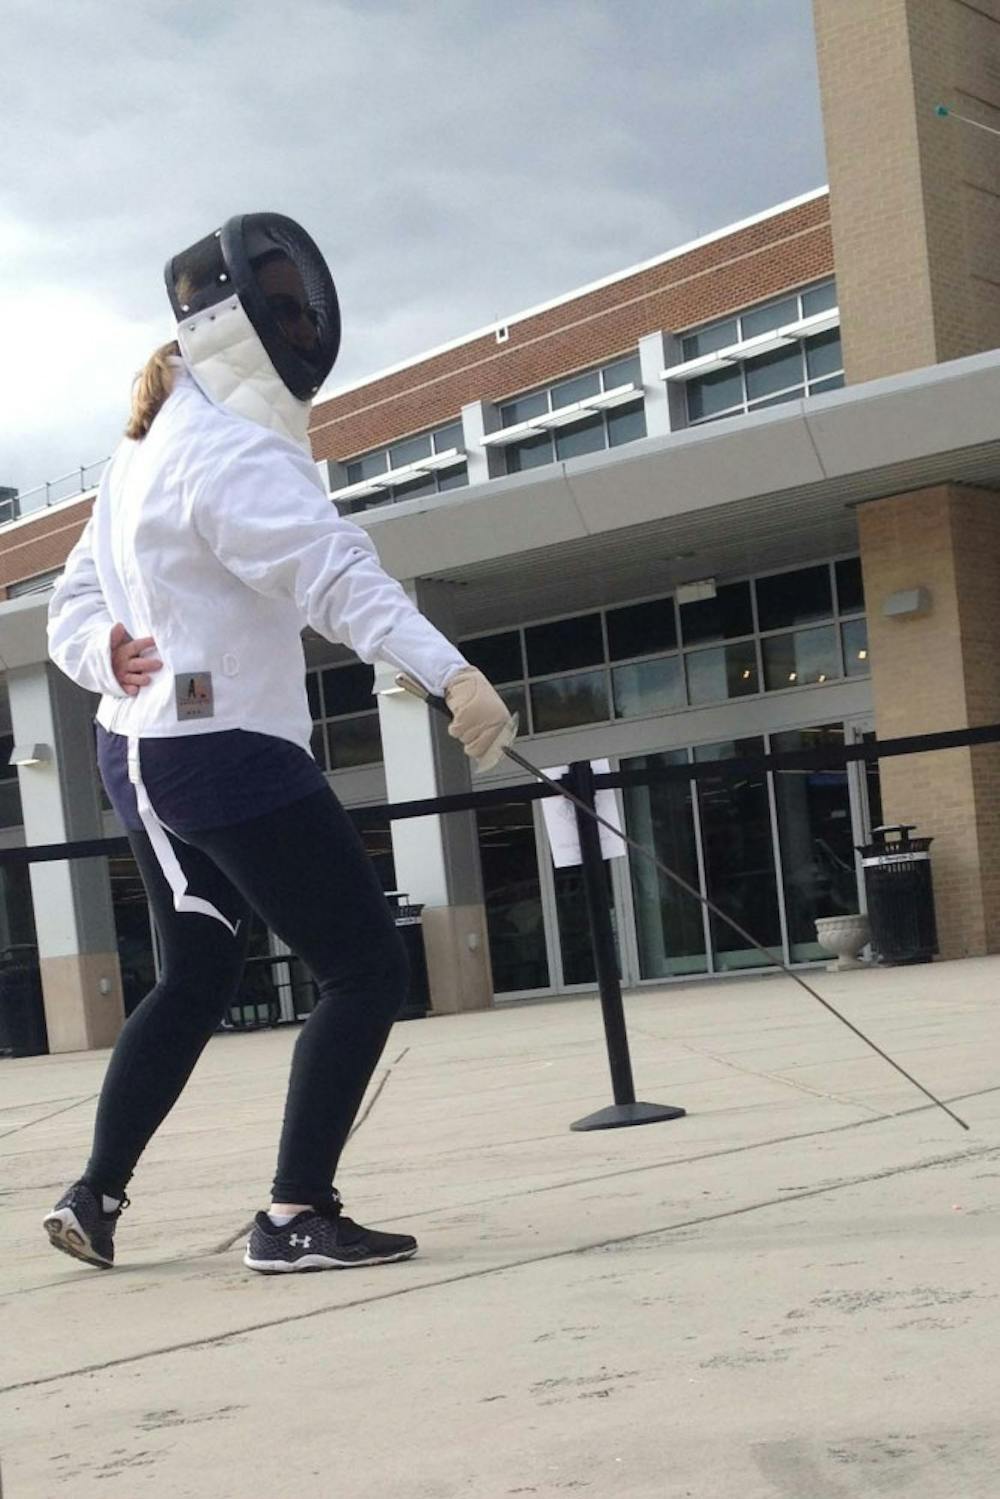 Breaking down fences: Fencing club shows off sword play in front of campus community